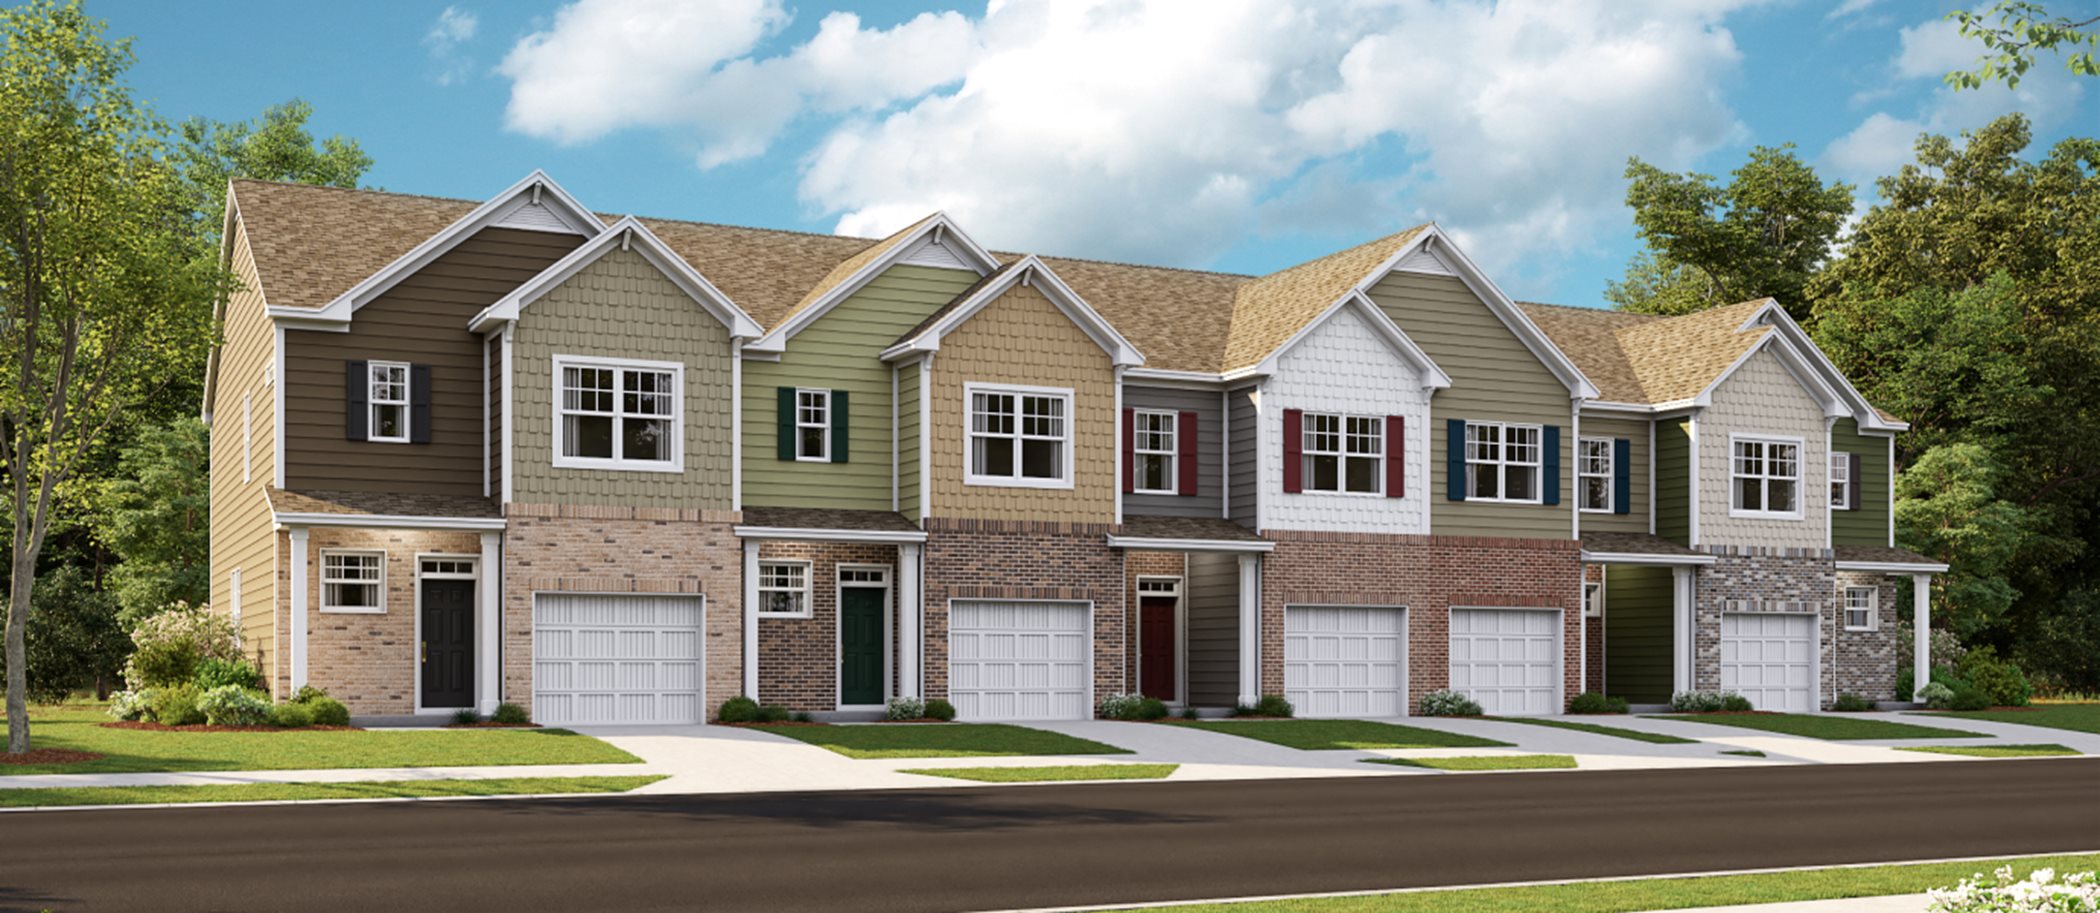 Chateau Townhomes Streetscene Rendering